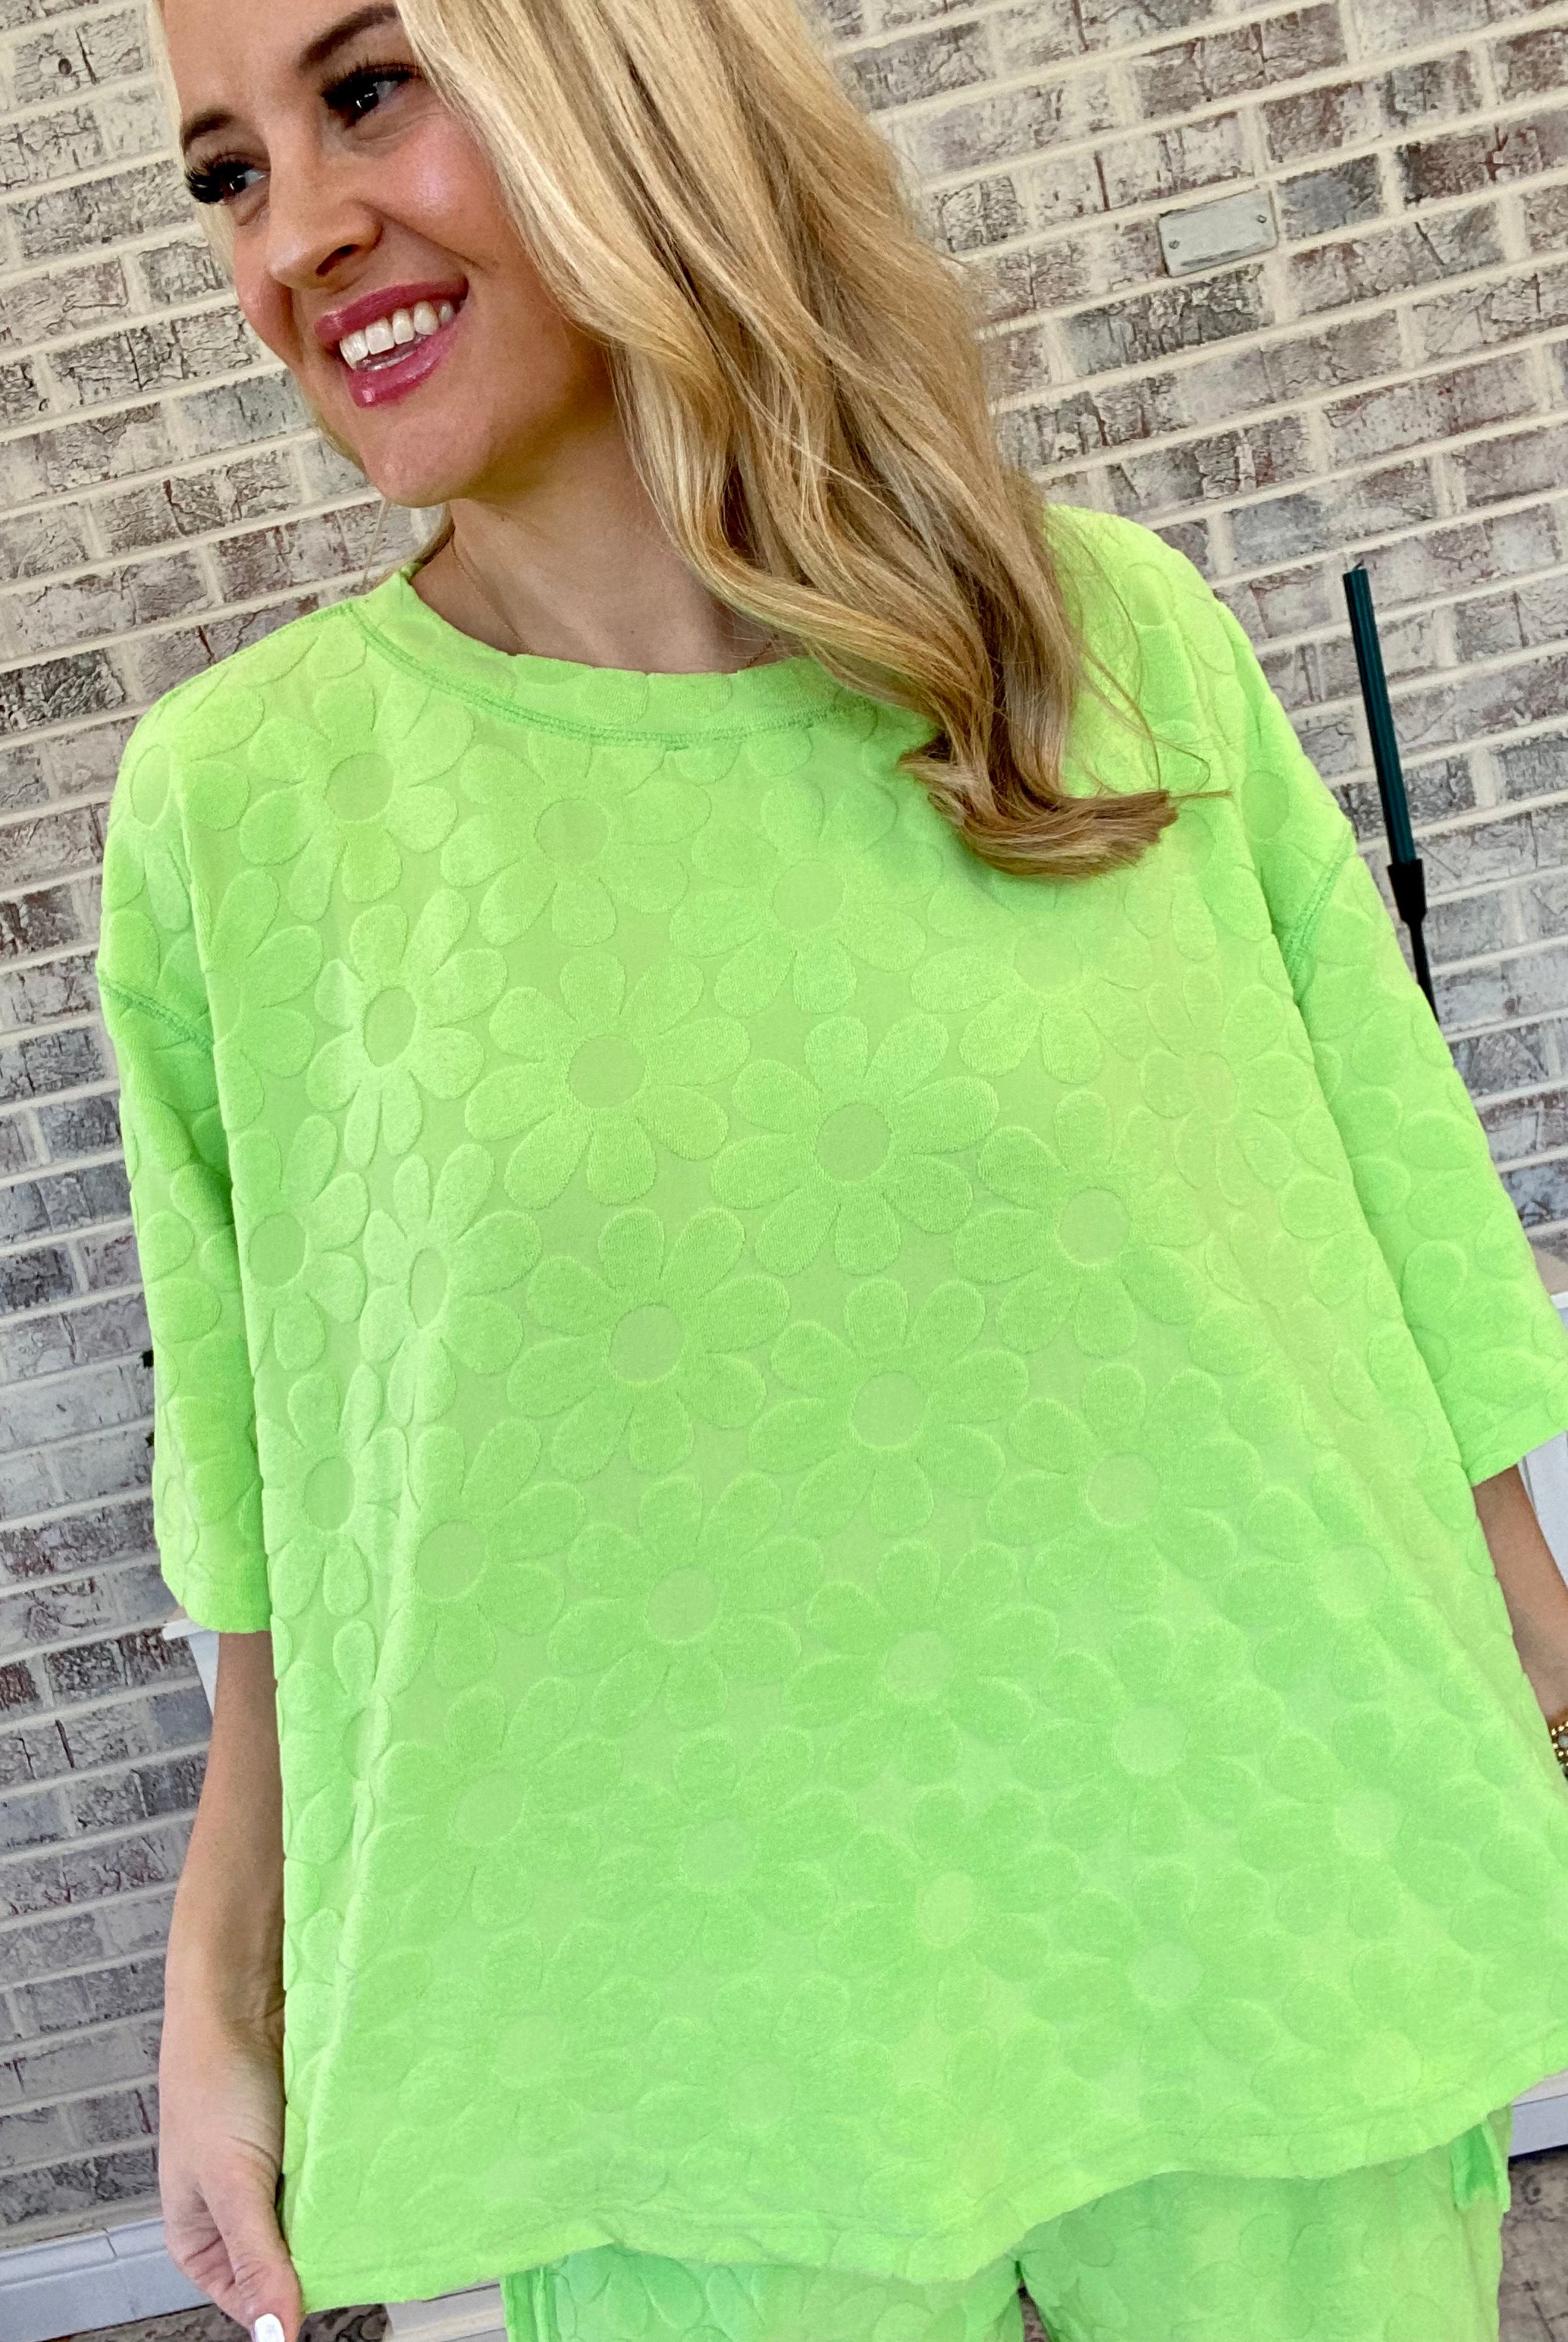 Lime a’ Rita Top-100 Short Sleeve Tops-The Lovely Closet-The Lovely Closet, Women's Fashion Boutique in Alexandria, KY